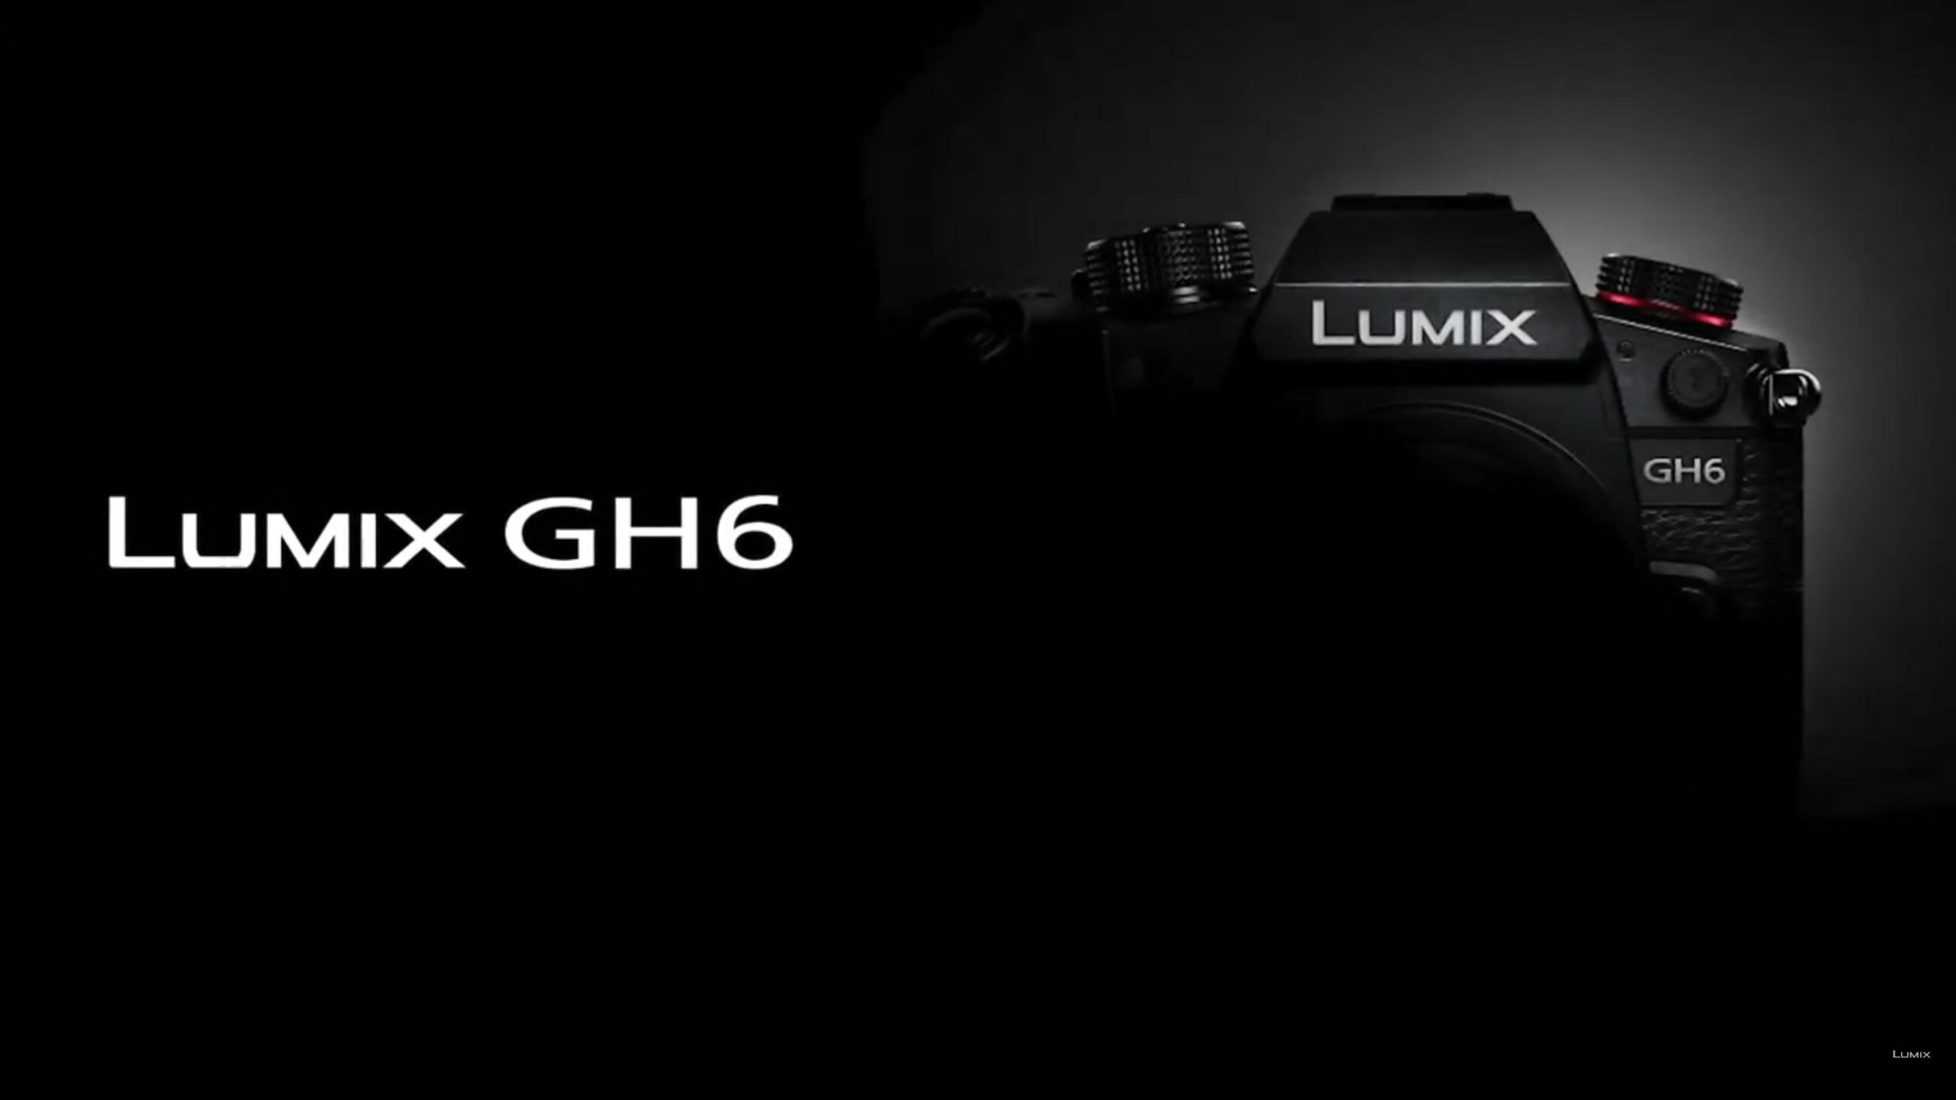 Yes, the Panasonic Lumix GH6 is actually coming! And it shoots 4K 